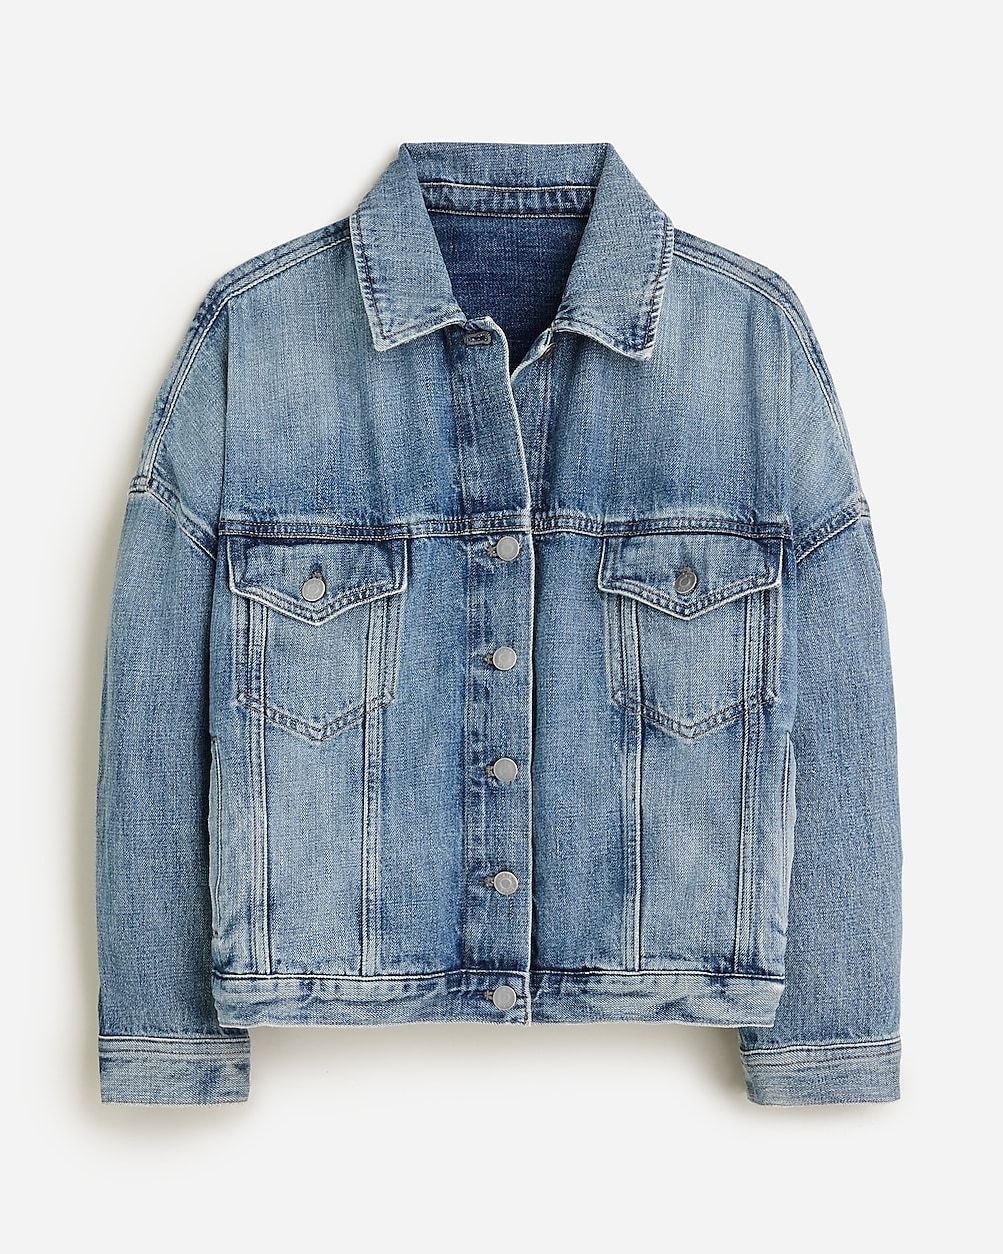 top rated4.0(9 REVIEWS)Limited-edition Point Sur denim trucker jacket in Beach Way wash$179.50$29... | J.Crew US